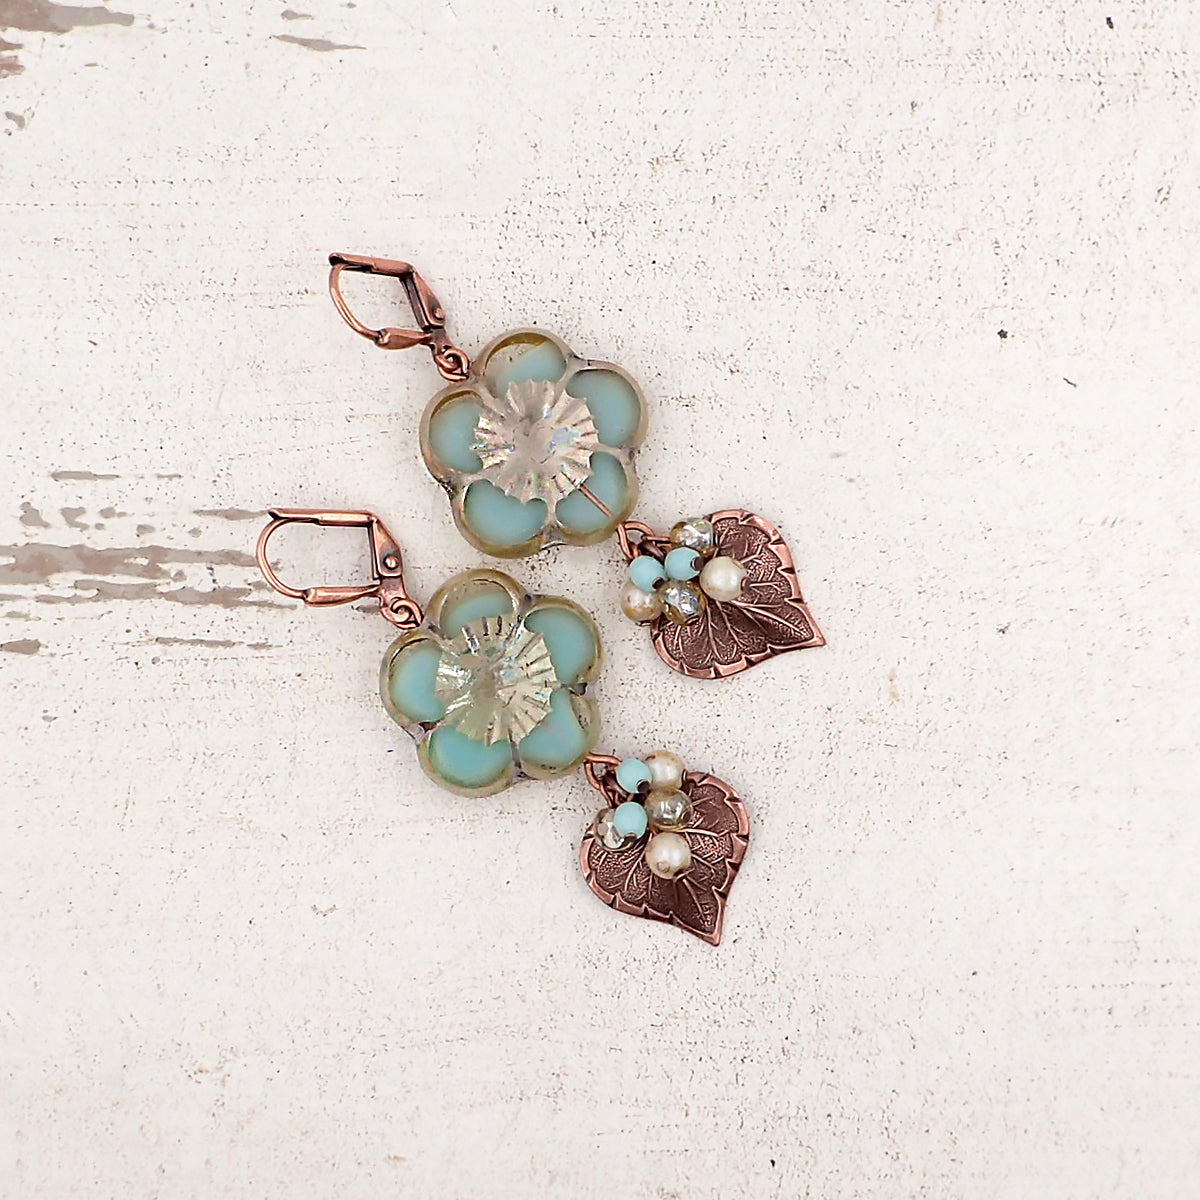 Czech Glass Earrings with Artisan Flower Beads, Mint Green and Champagne